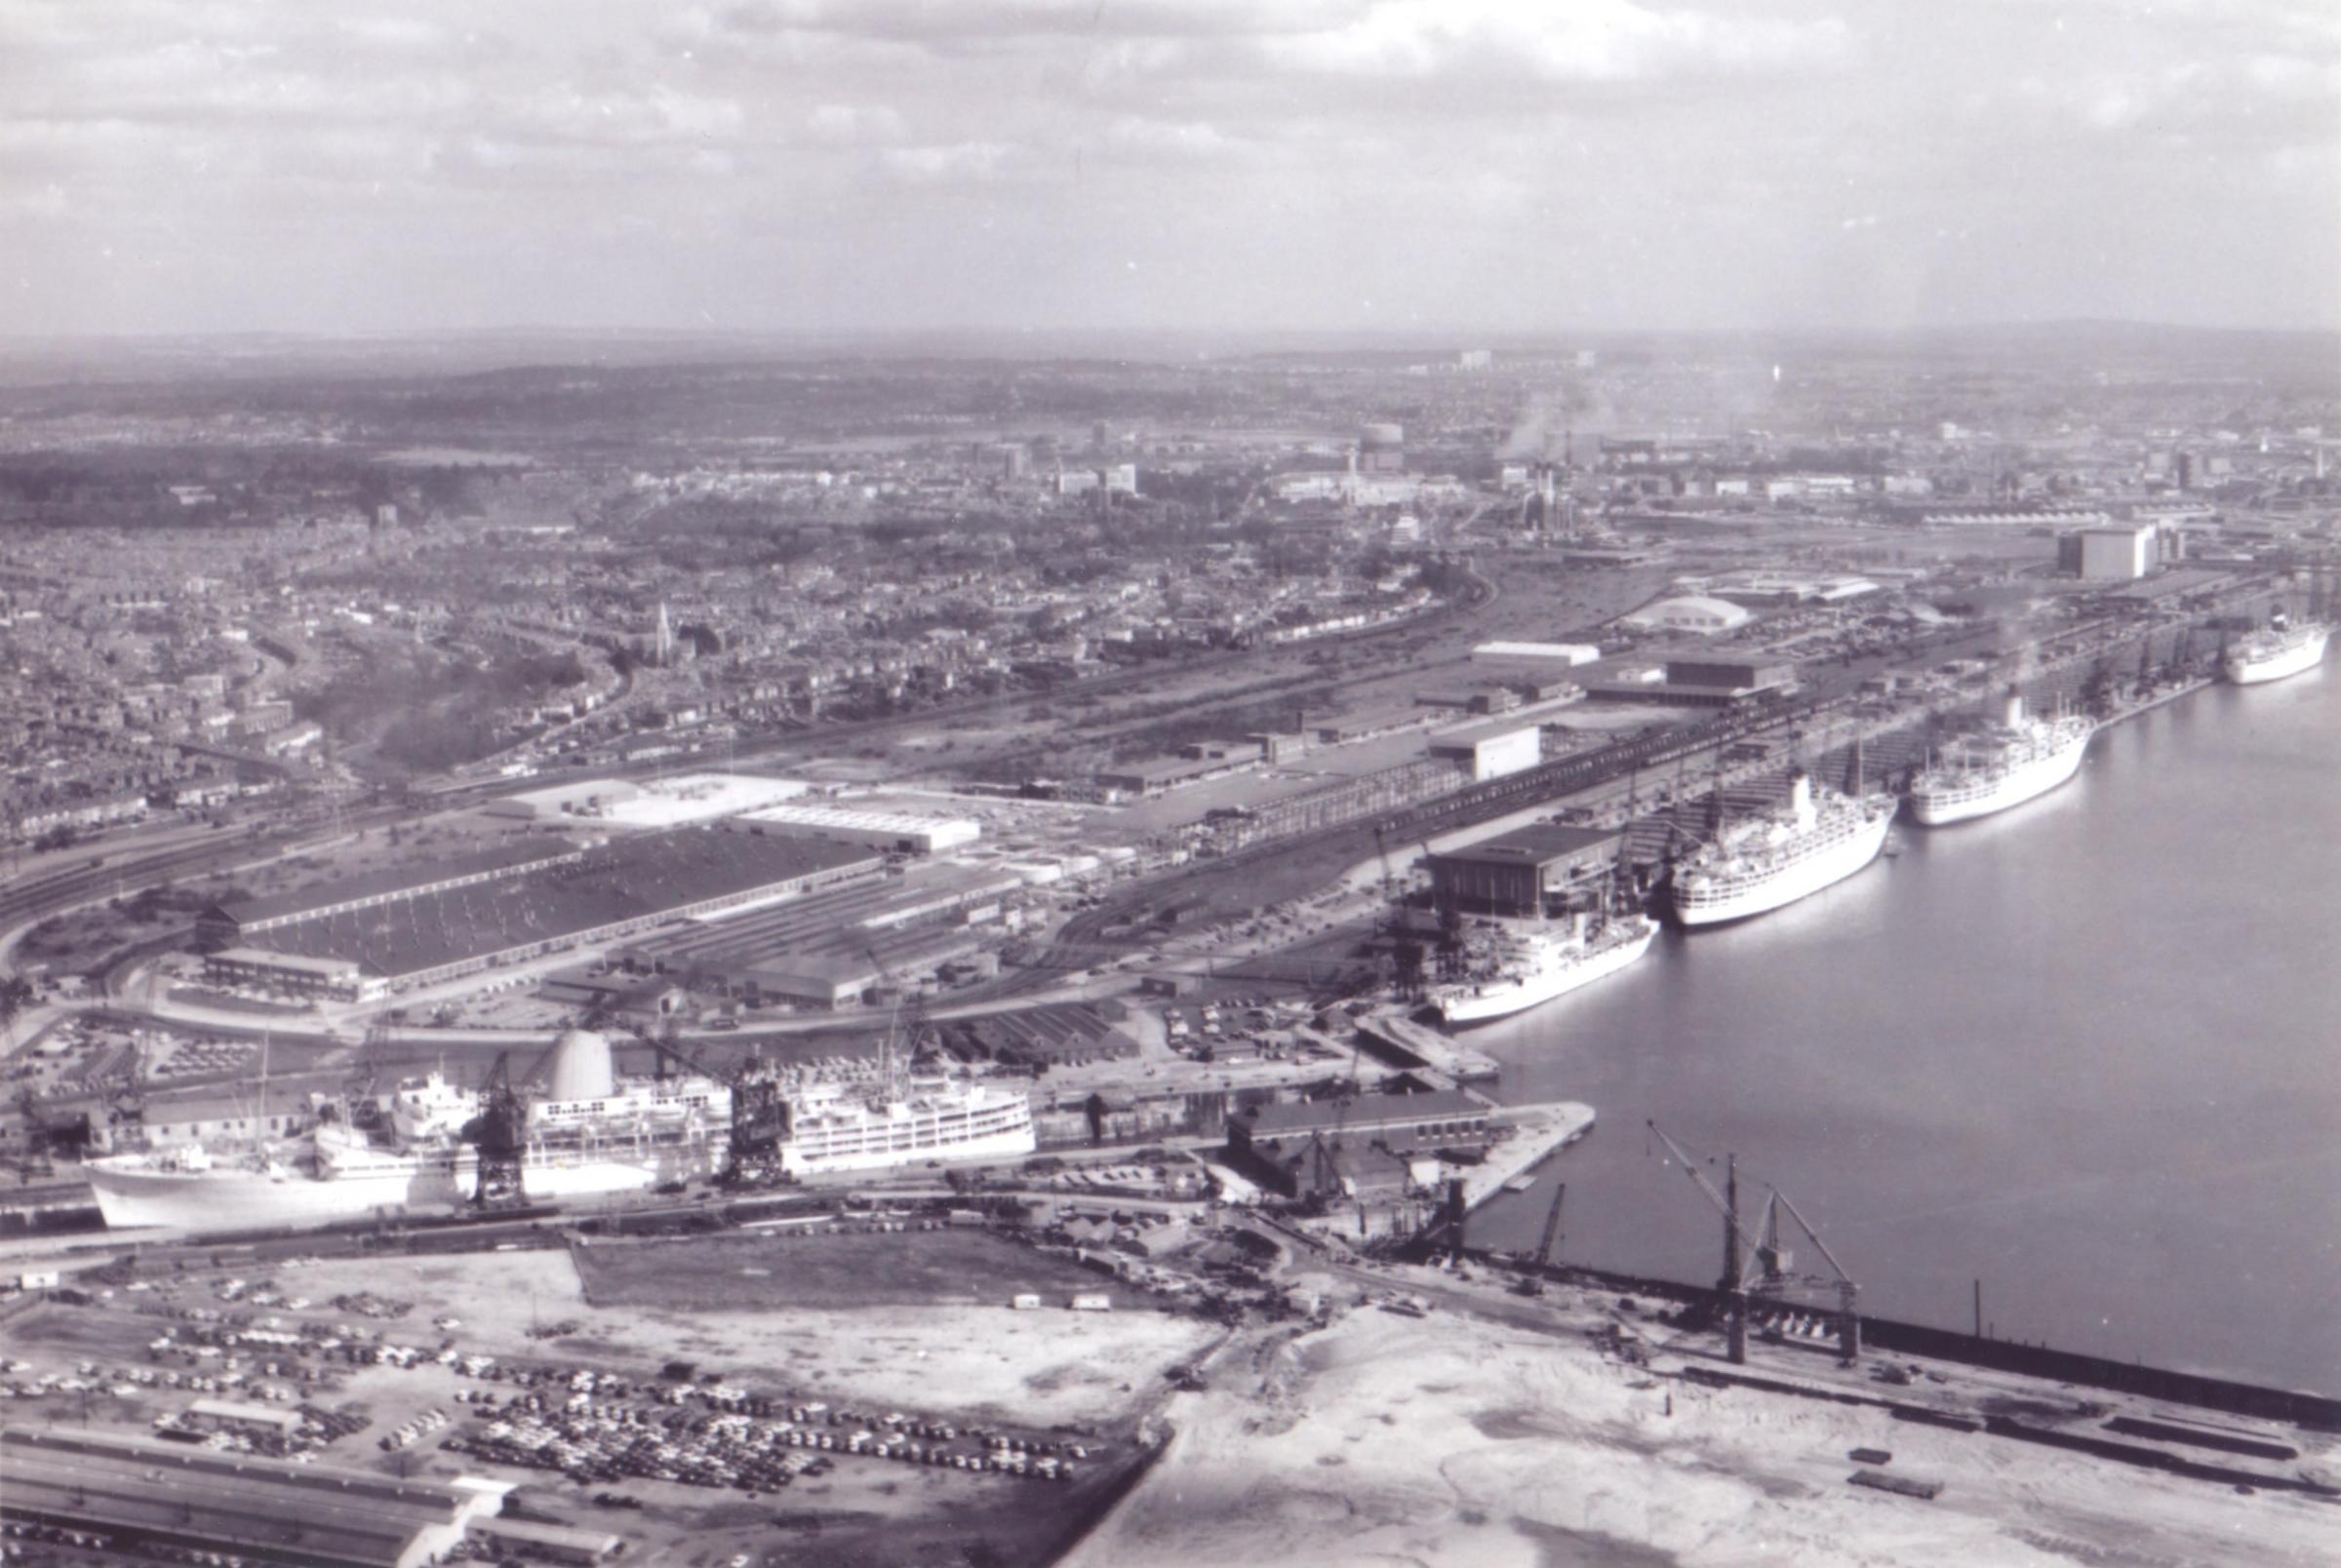 The Western Docks showing the King George V Dry Dock in the foreground.